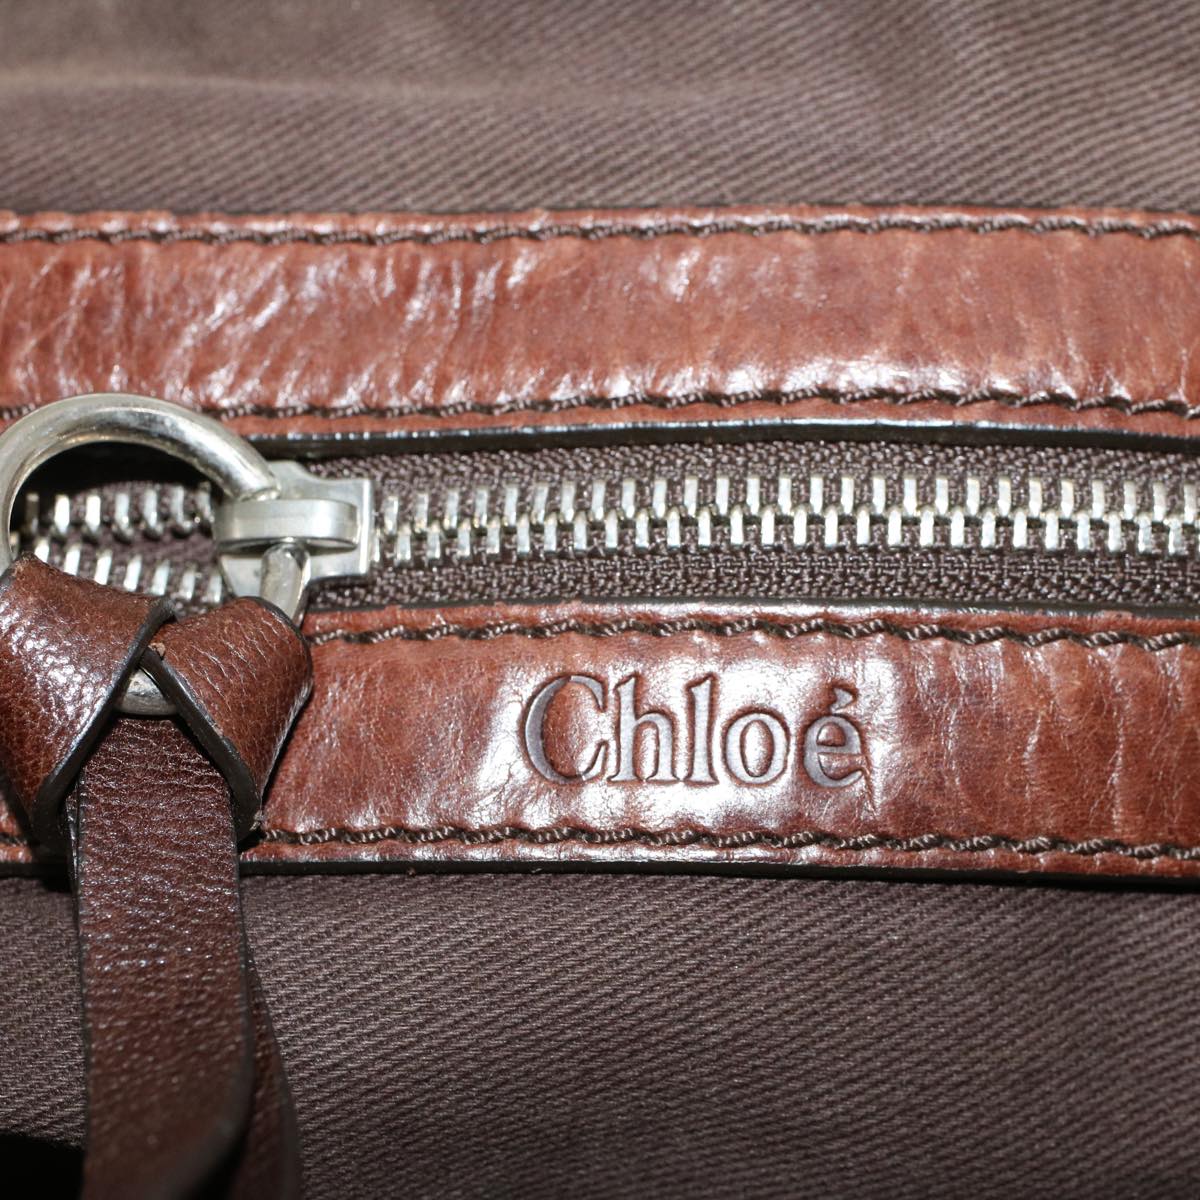 Chloe Hand Bag Leather Brown 01-08-51-5267 Auth bs5116